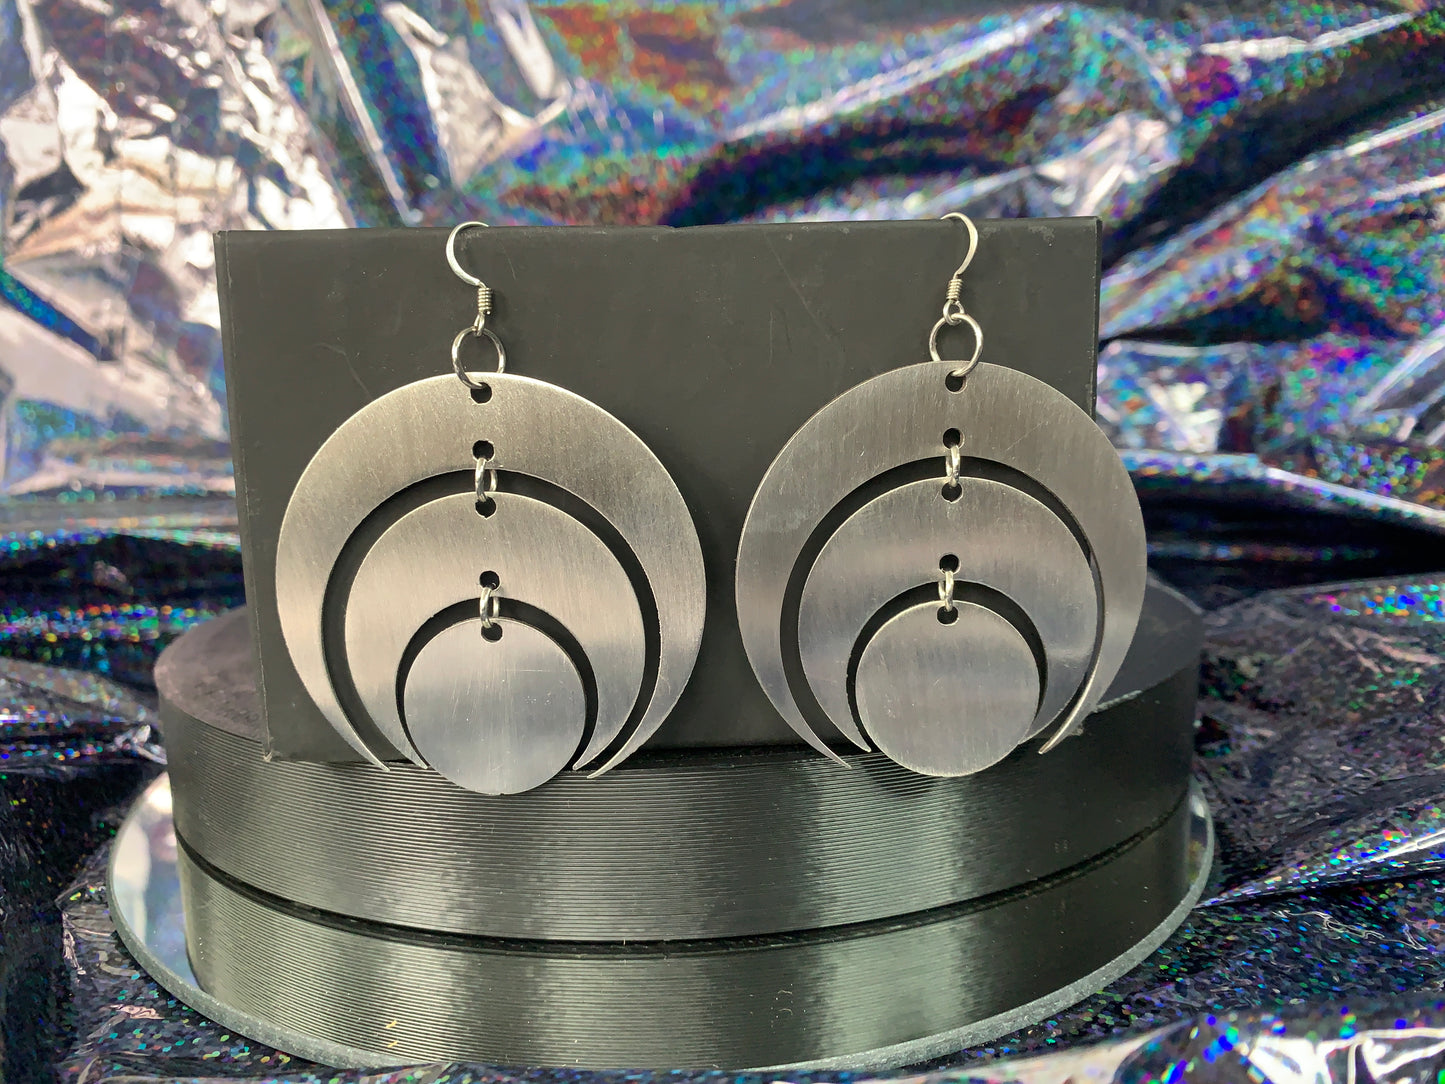 A pair of stainless steel laser cut earrings made into tiered inverted crescent shapes.